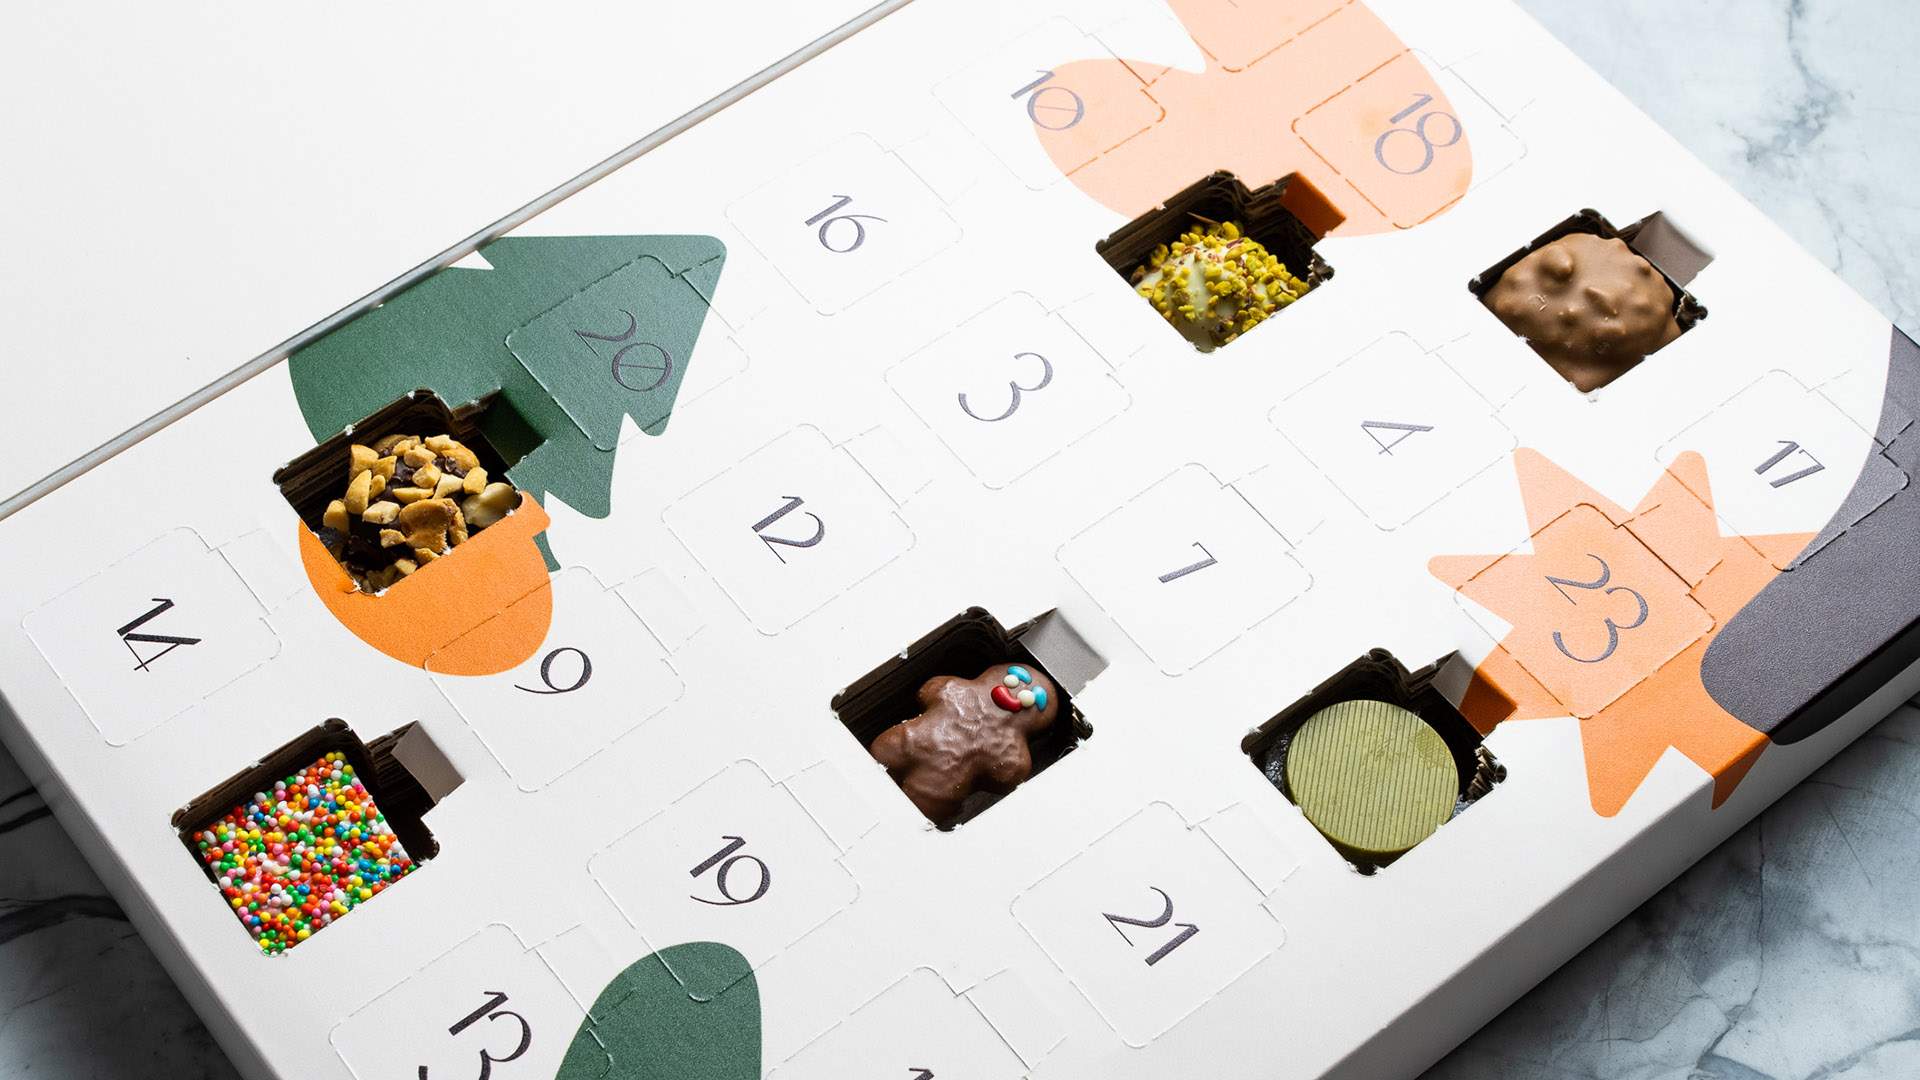 Gelato Messina Is Releasing Its First-Ever Advent Calendar to Make the Festive Season Extra Delicious